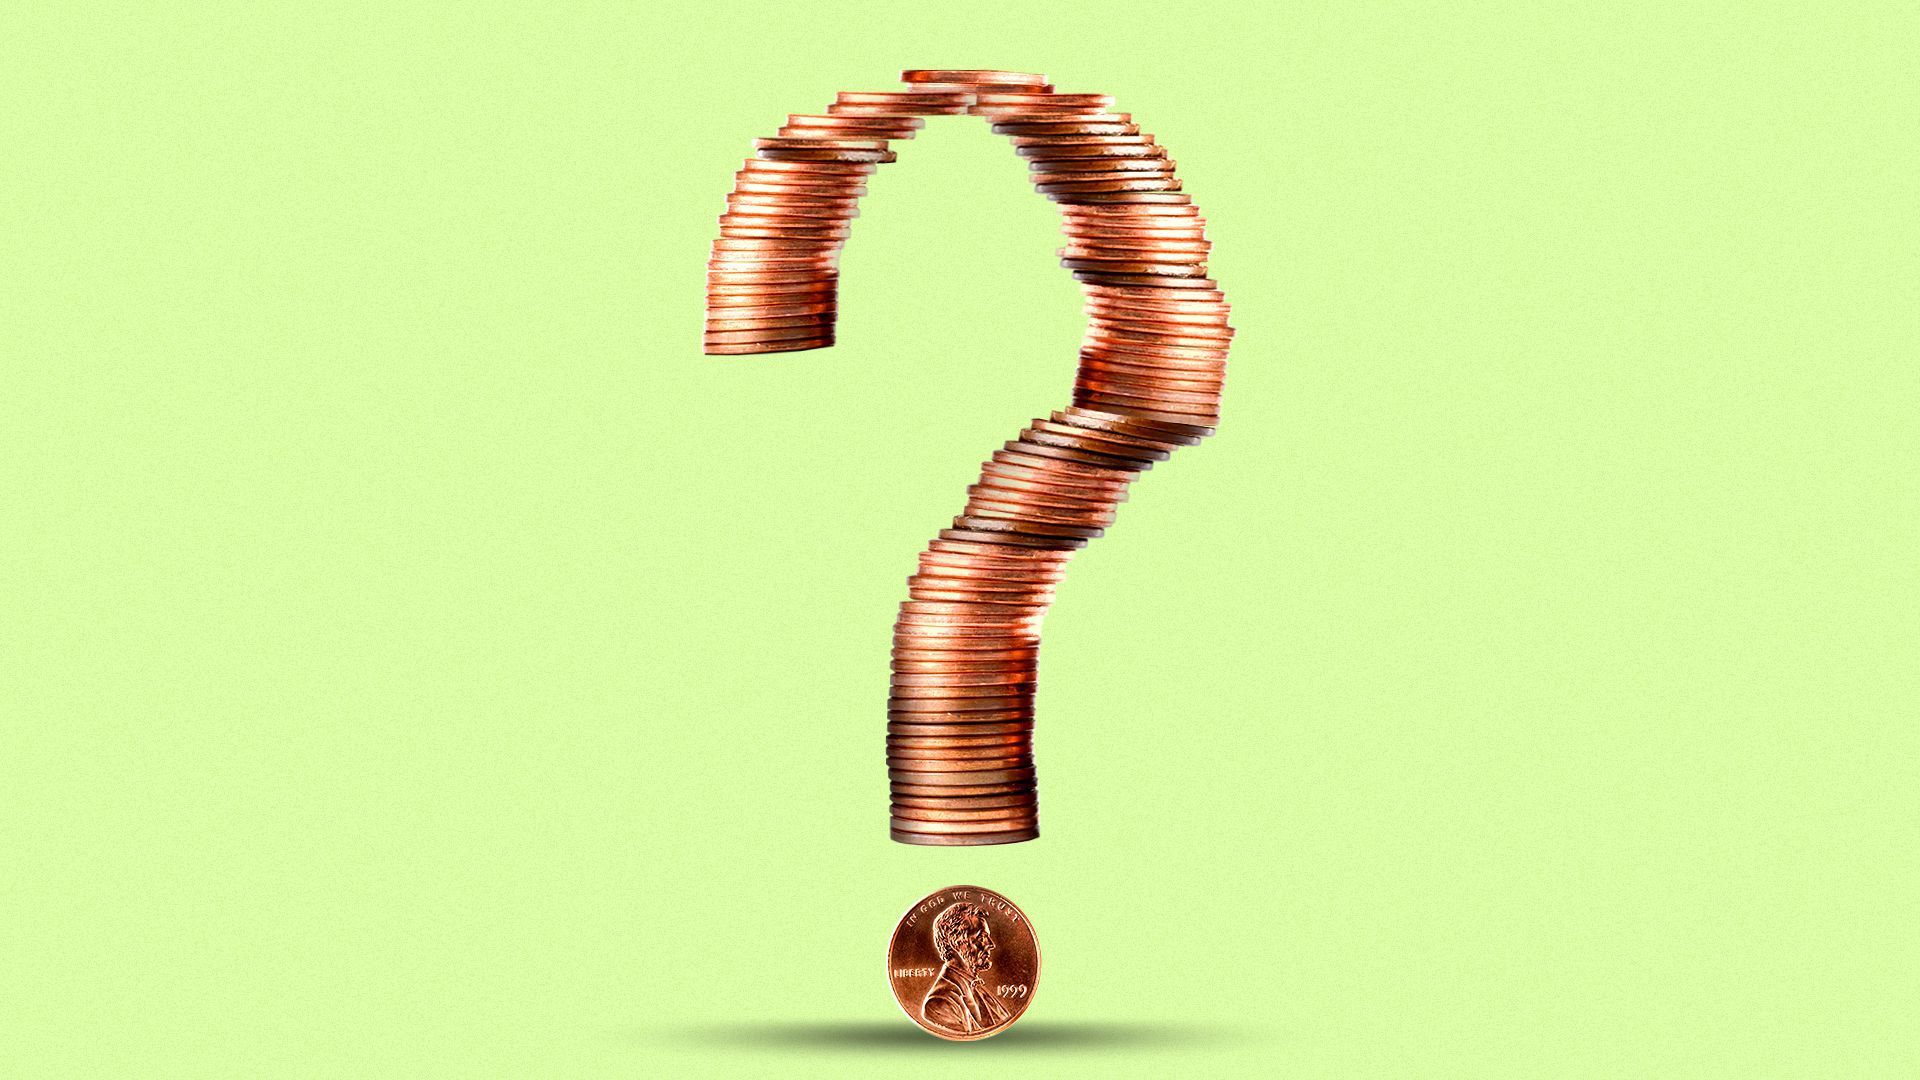 Illustration of a question mark comprised of pennies.